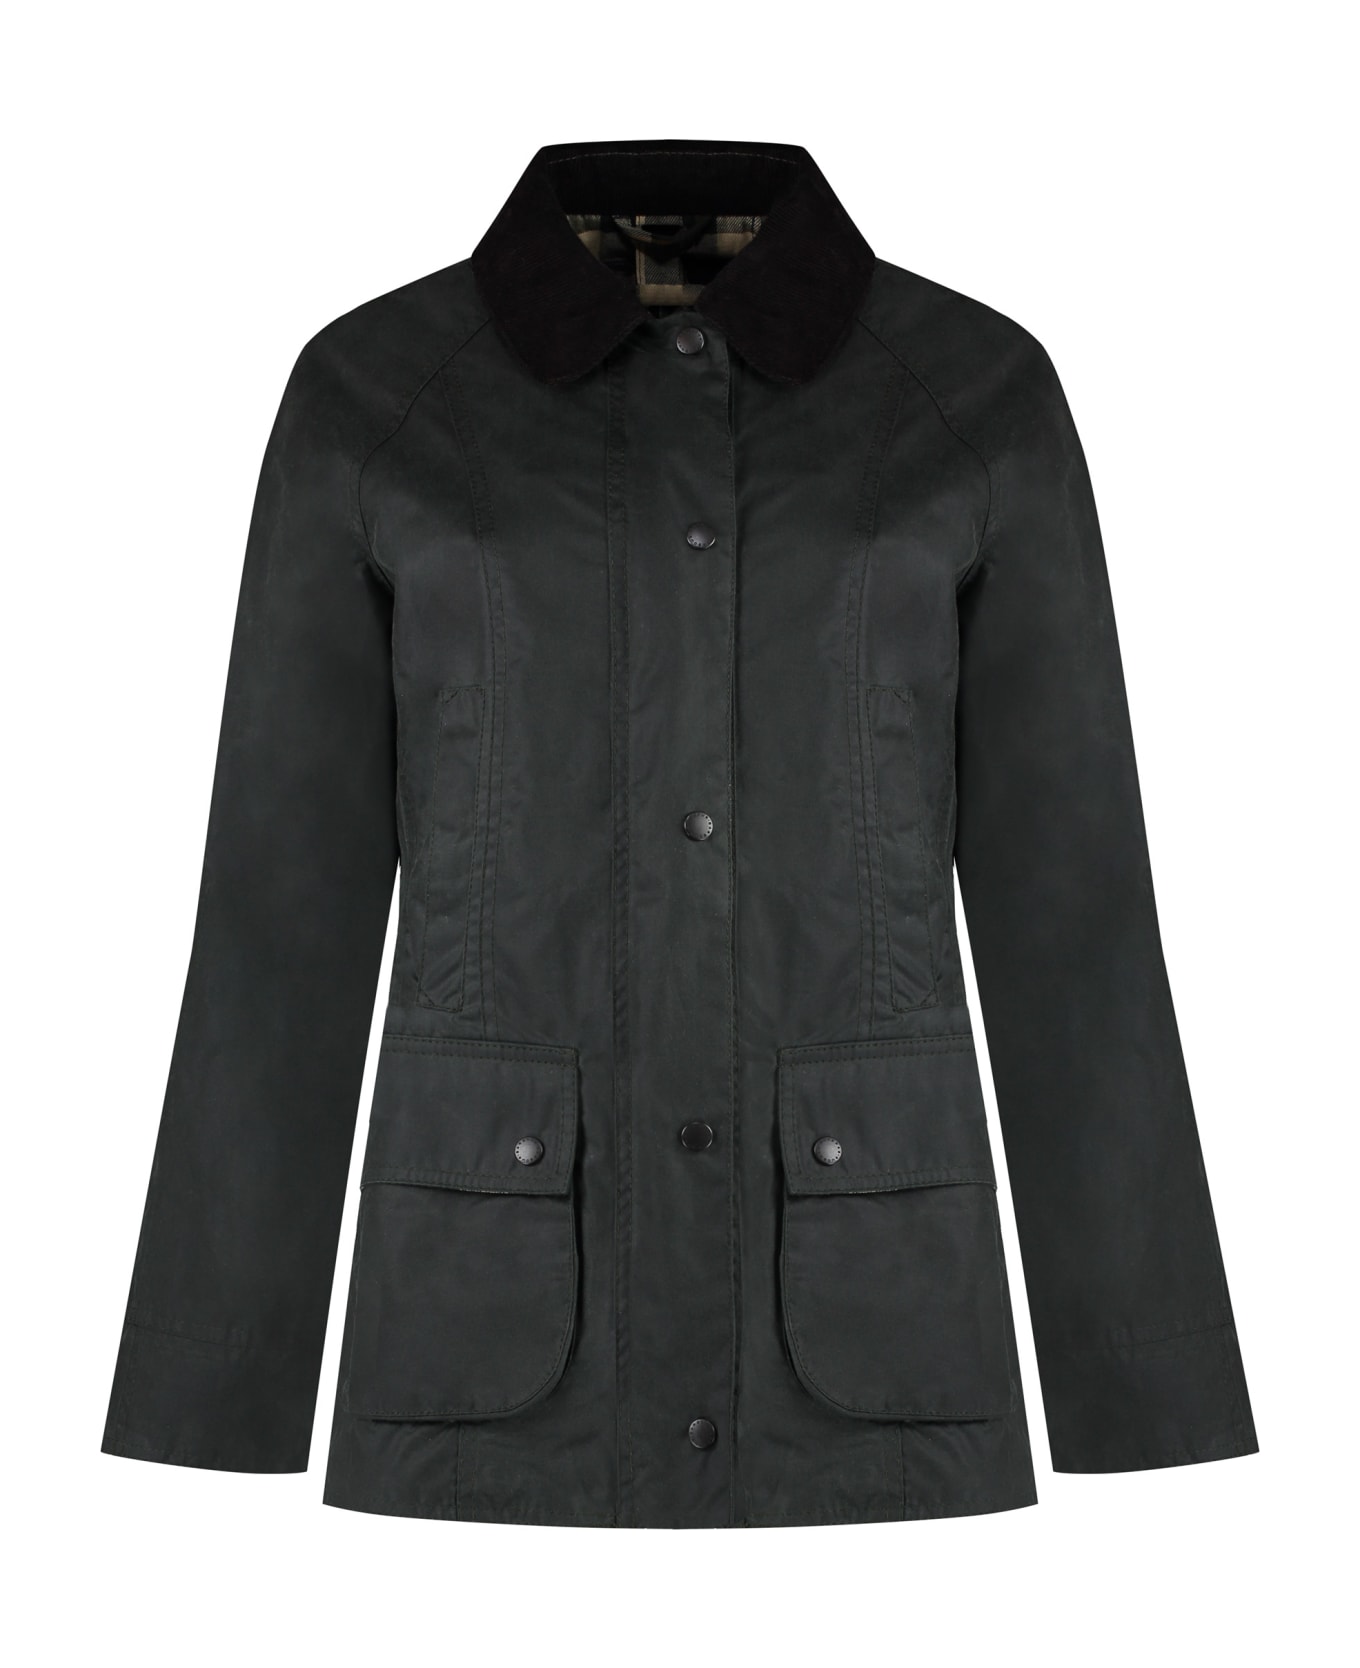 Barbour Beandell Waxed Cotton Jacket - green